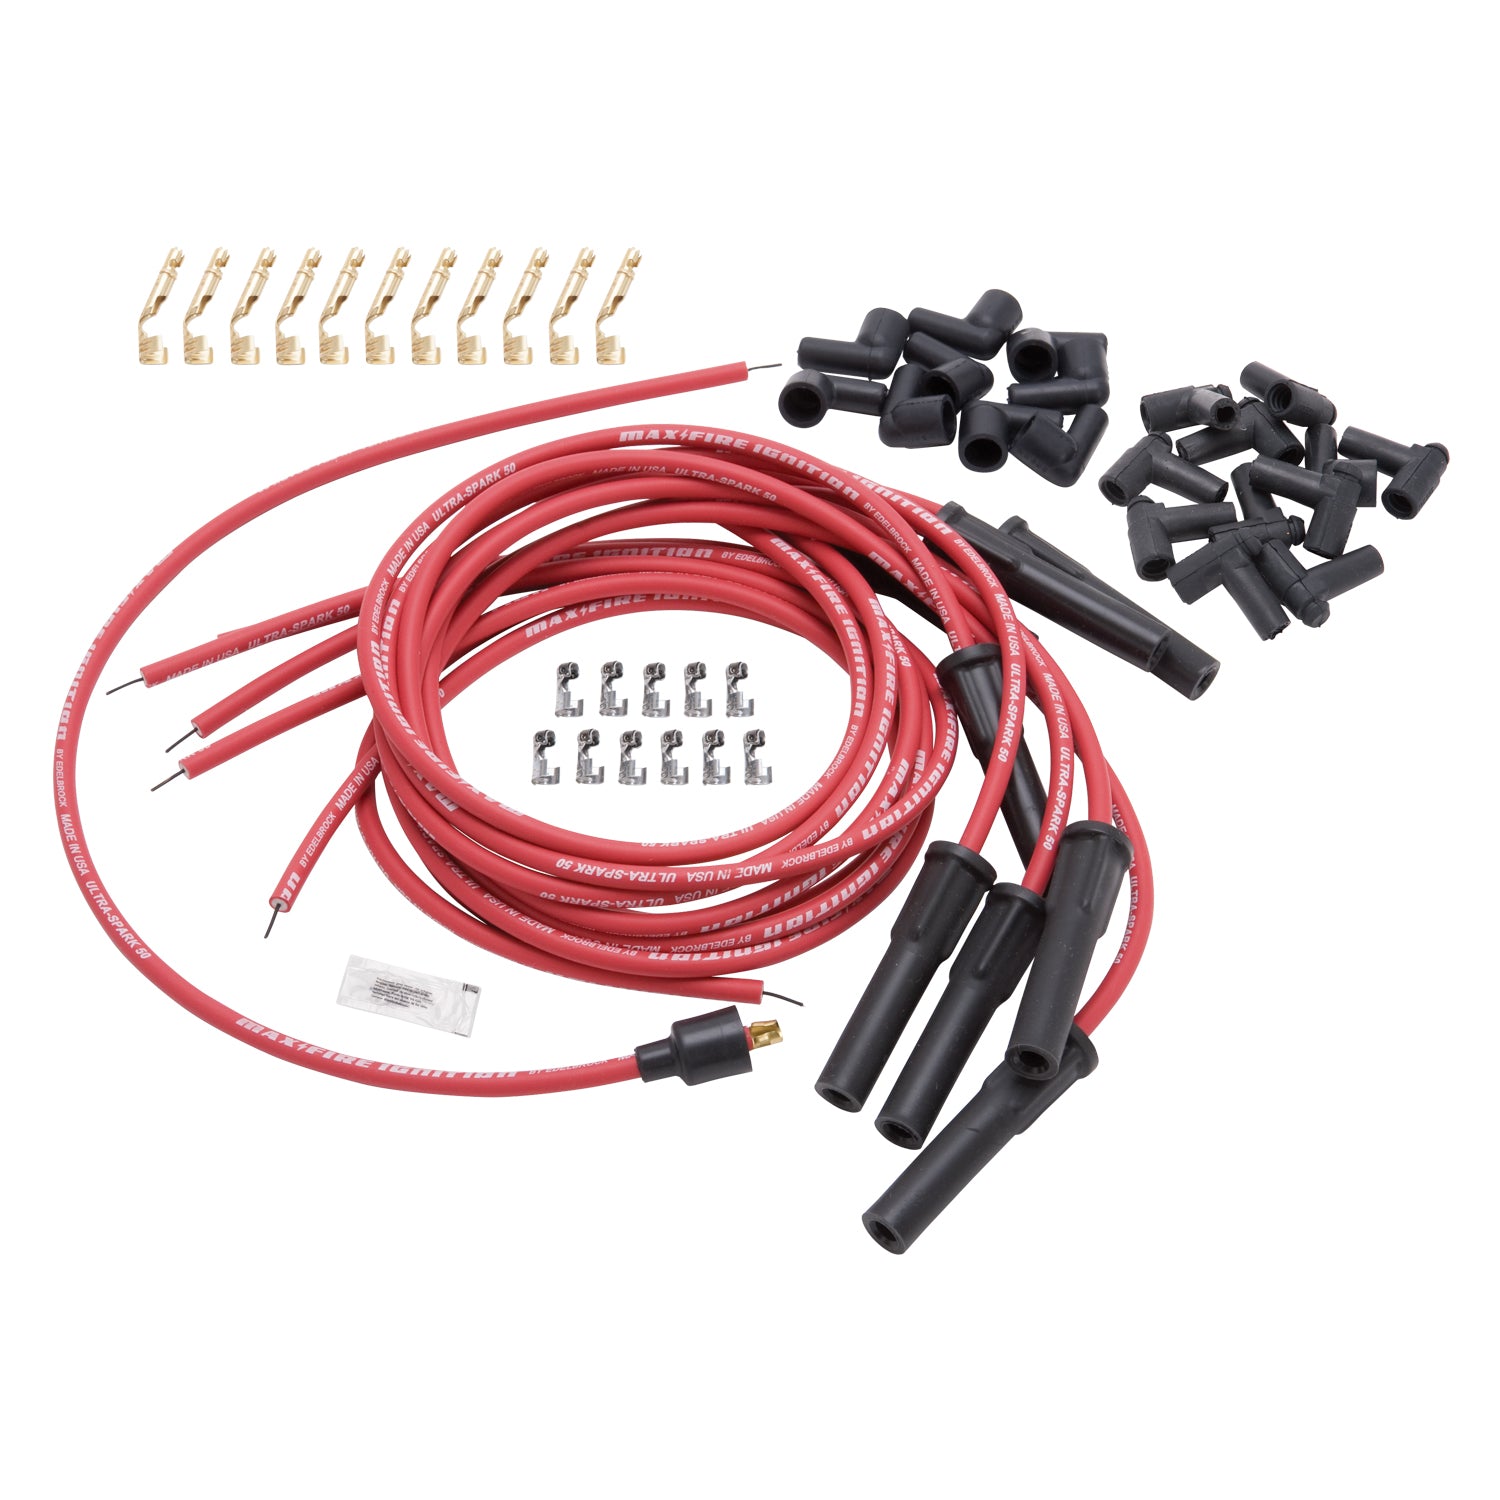 Edelbrock Max-Fire Universal High Performance's Spark Plug Wires